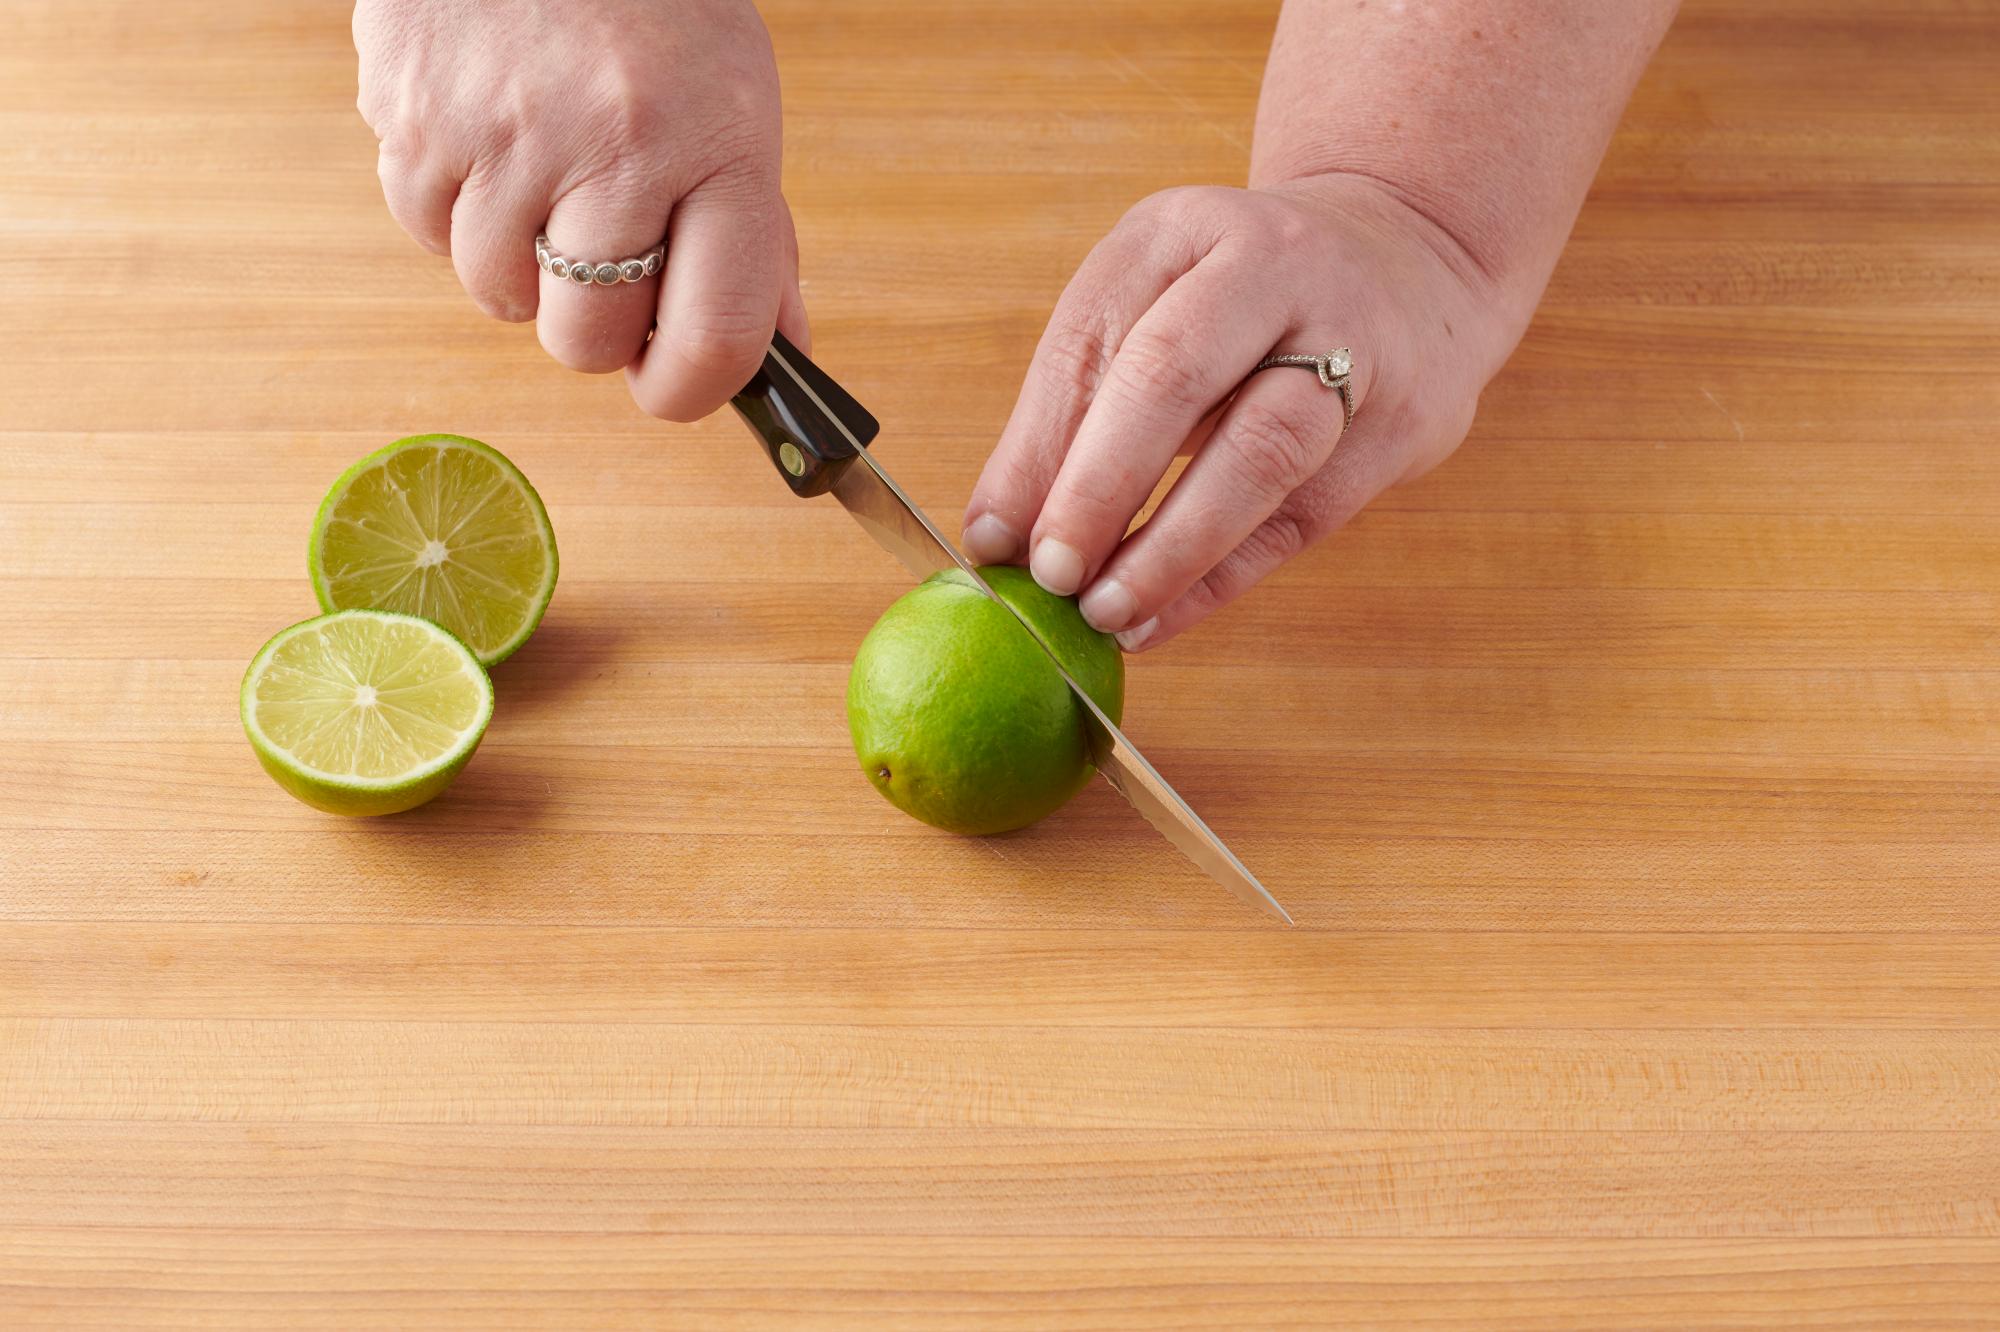 Using a Trimmer to cut the lime.